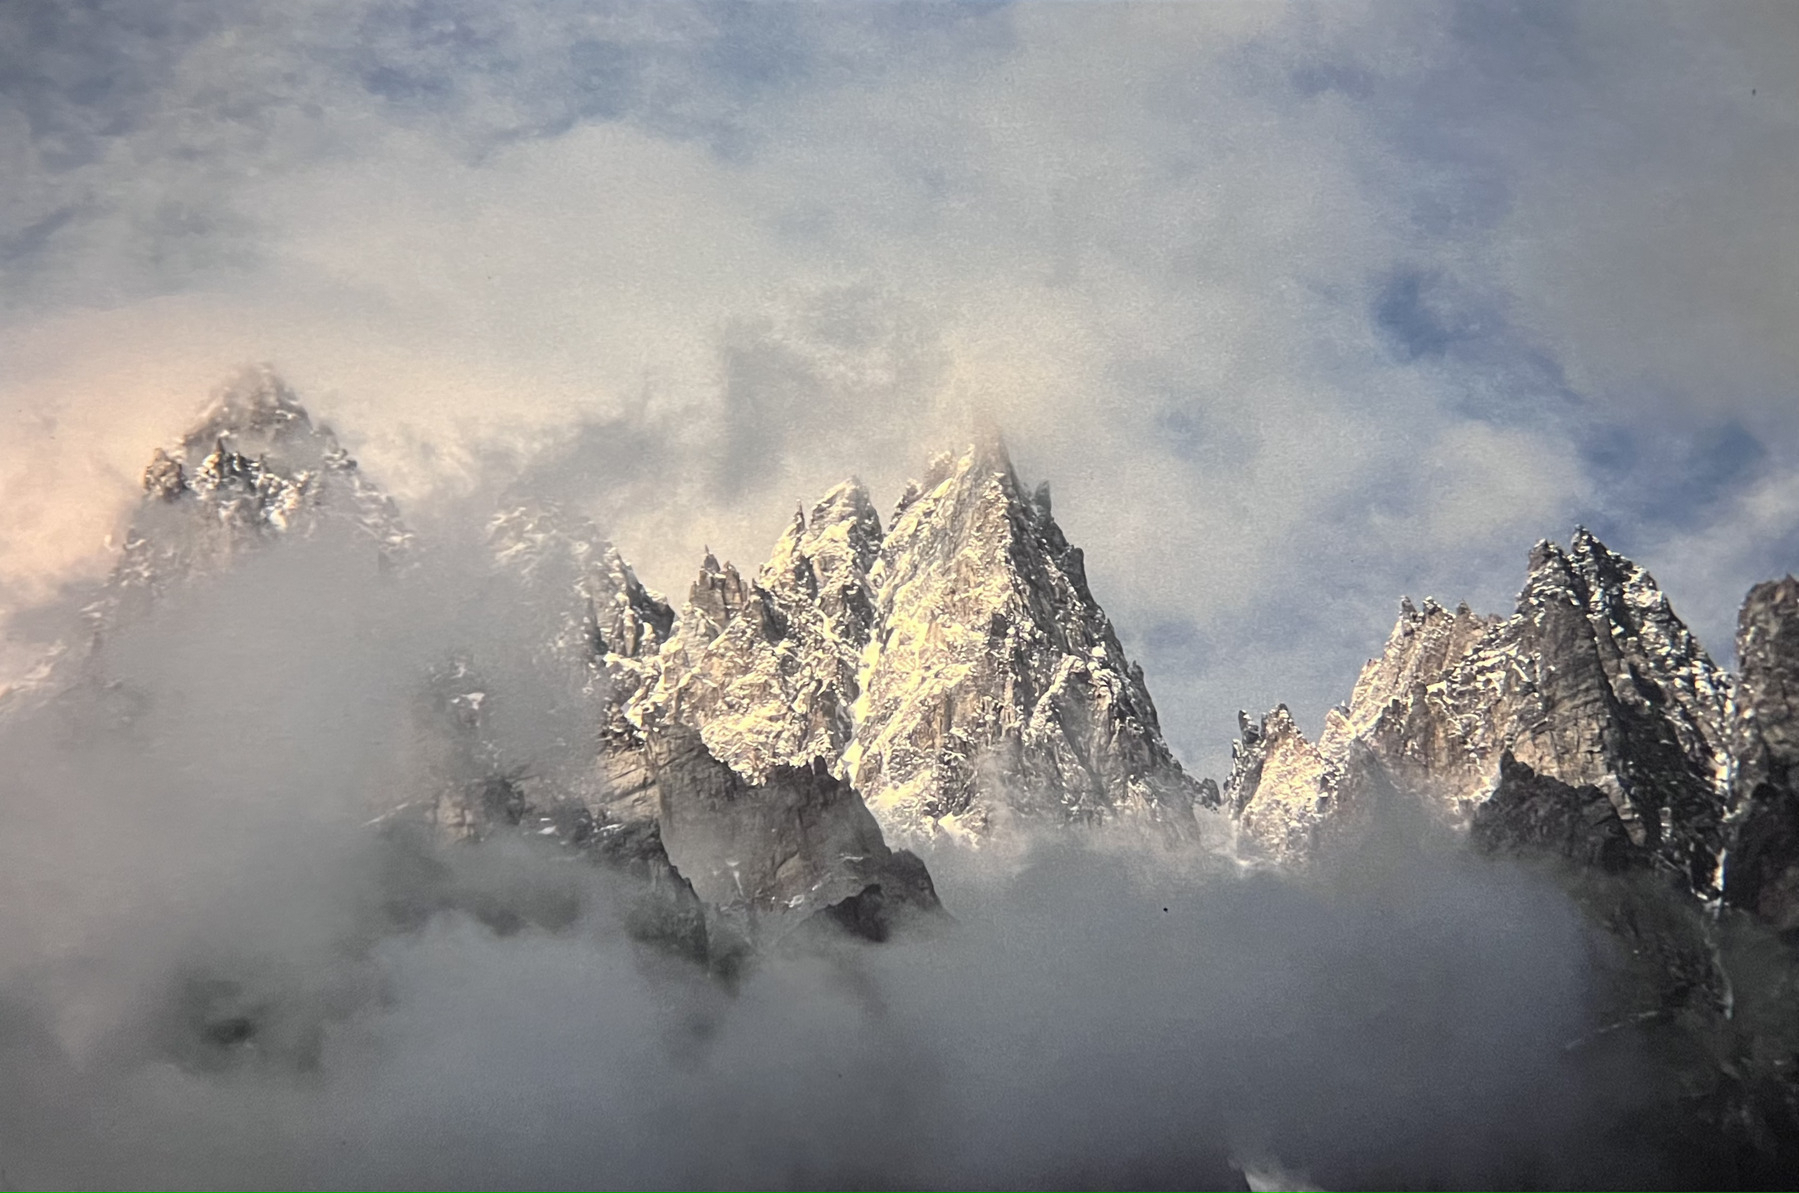 Grey, rugged, sharp mountain peaks with a little snow on them, surrounded by cloud